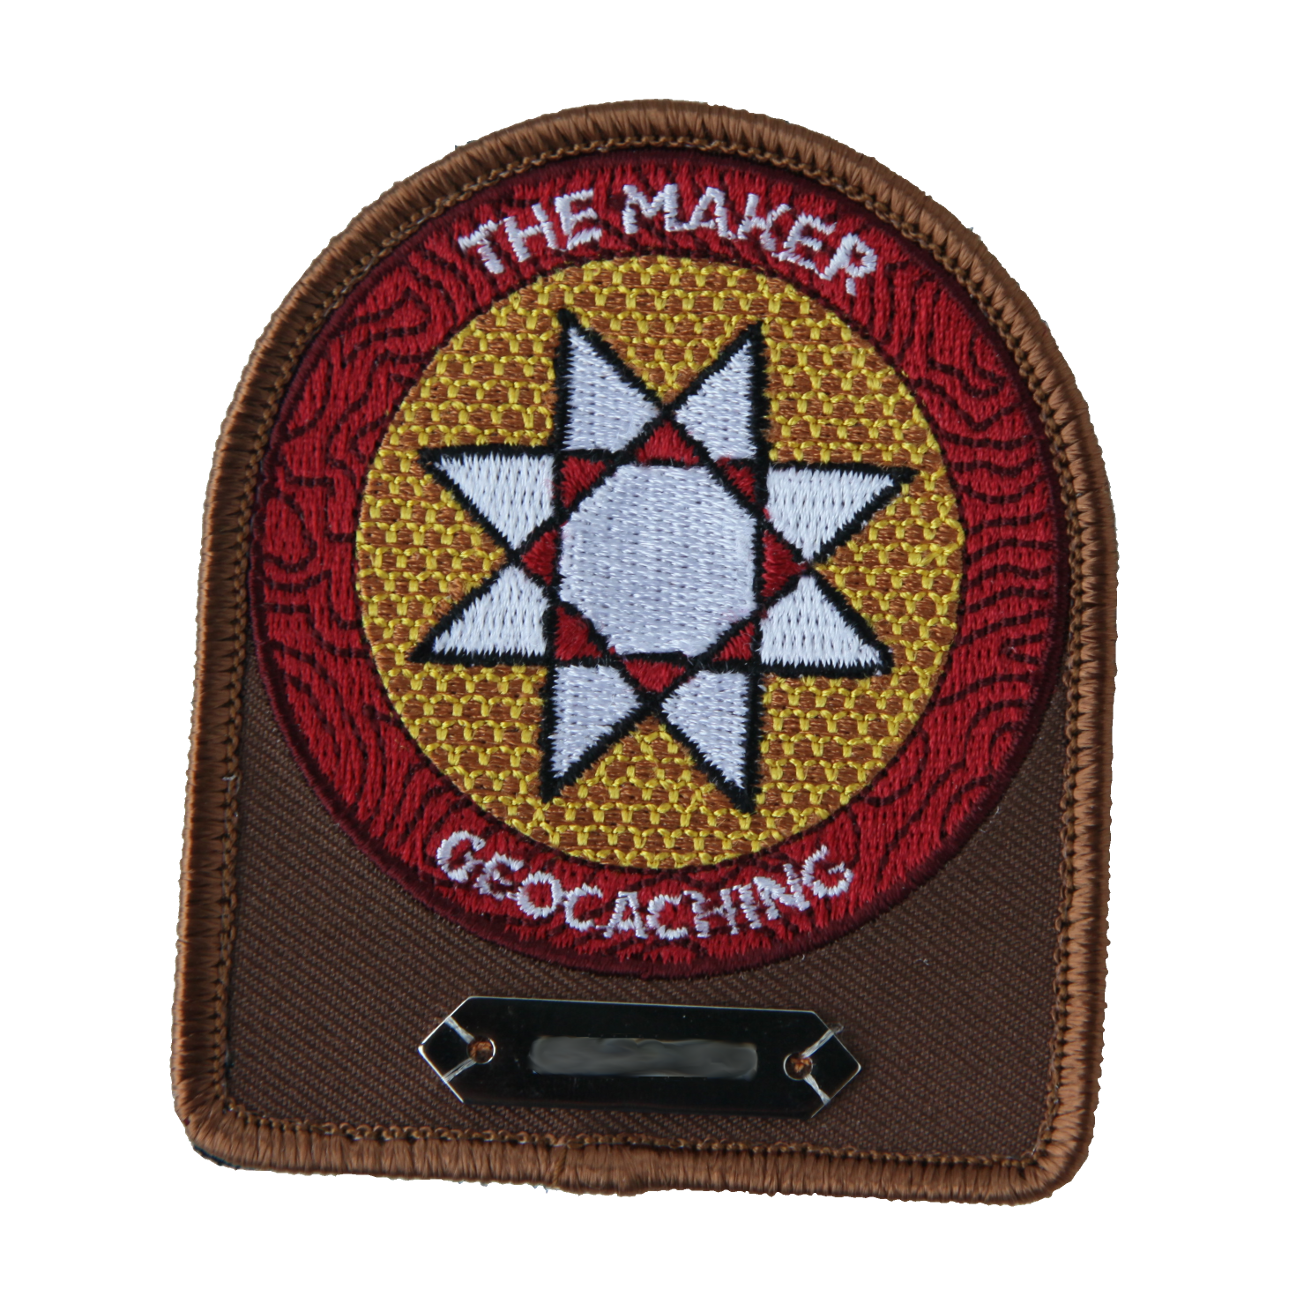 "Maker Madness", Trackable Patch